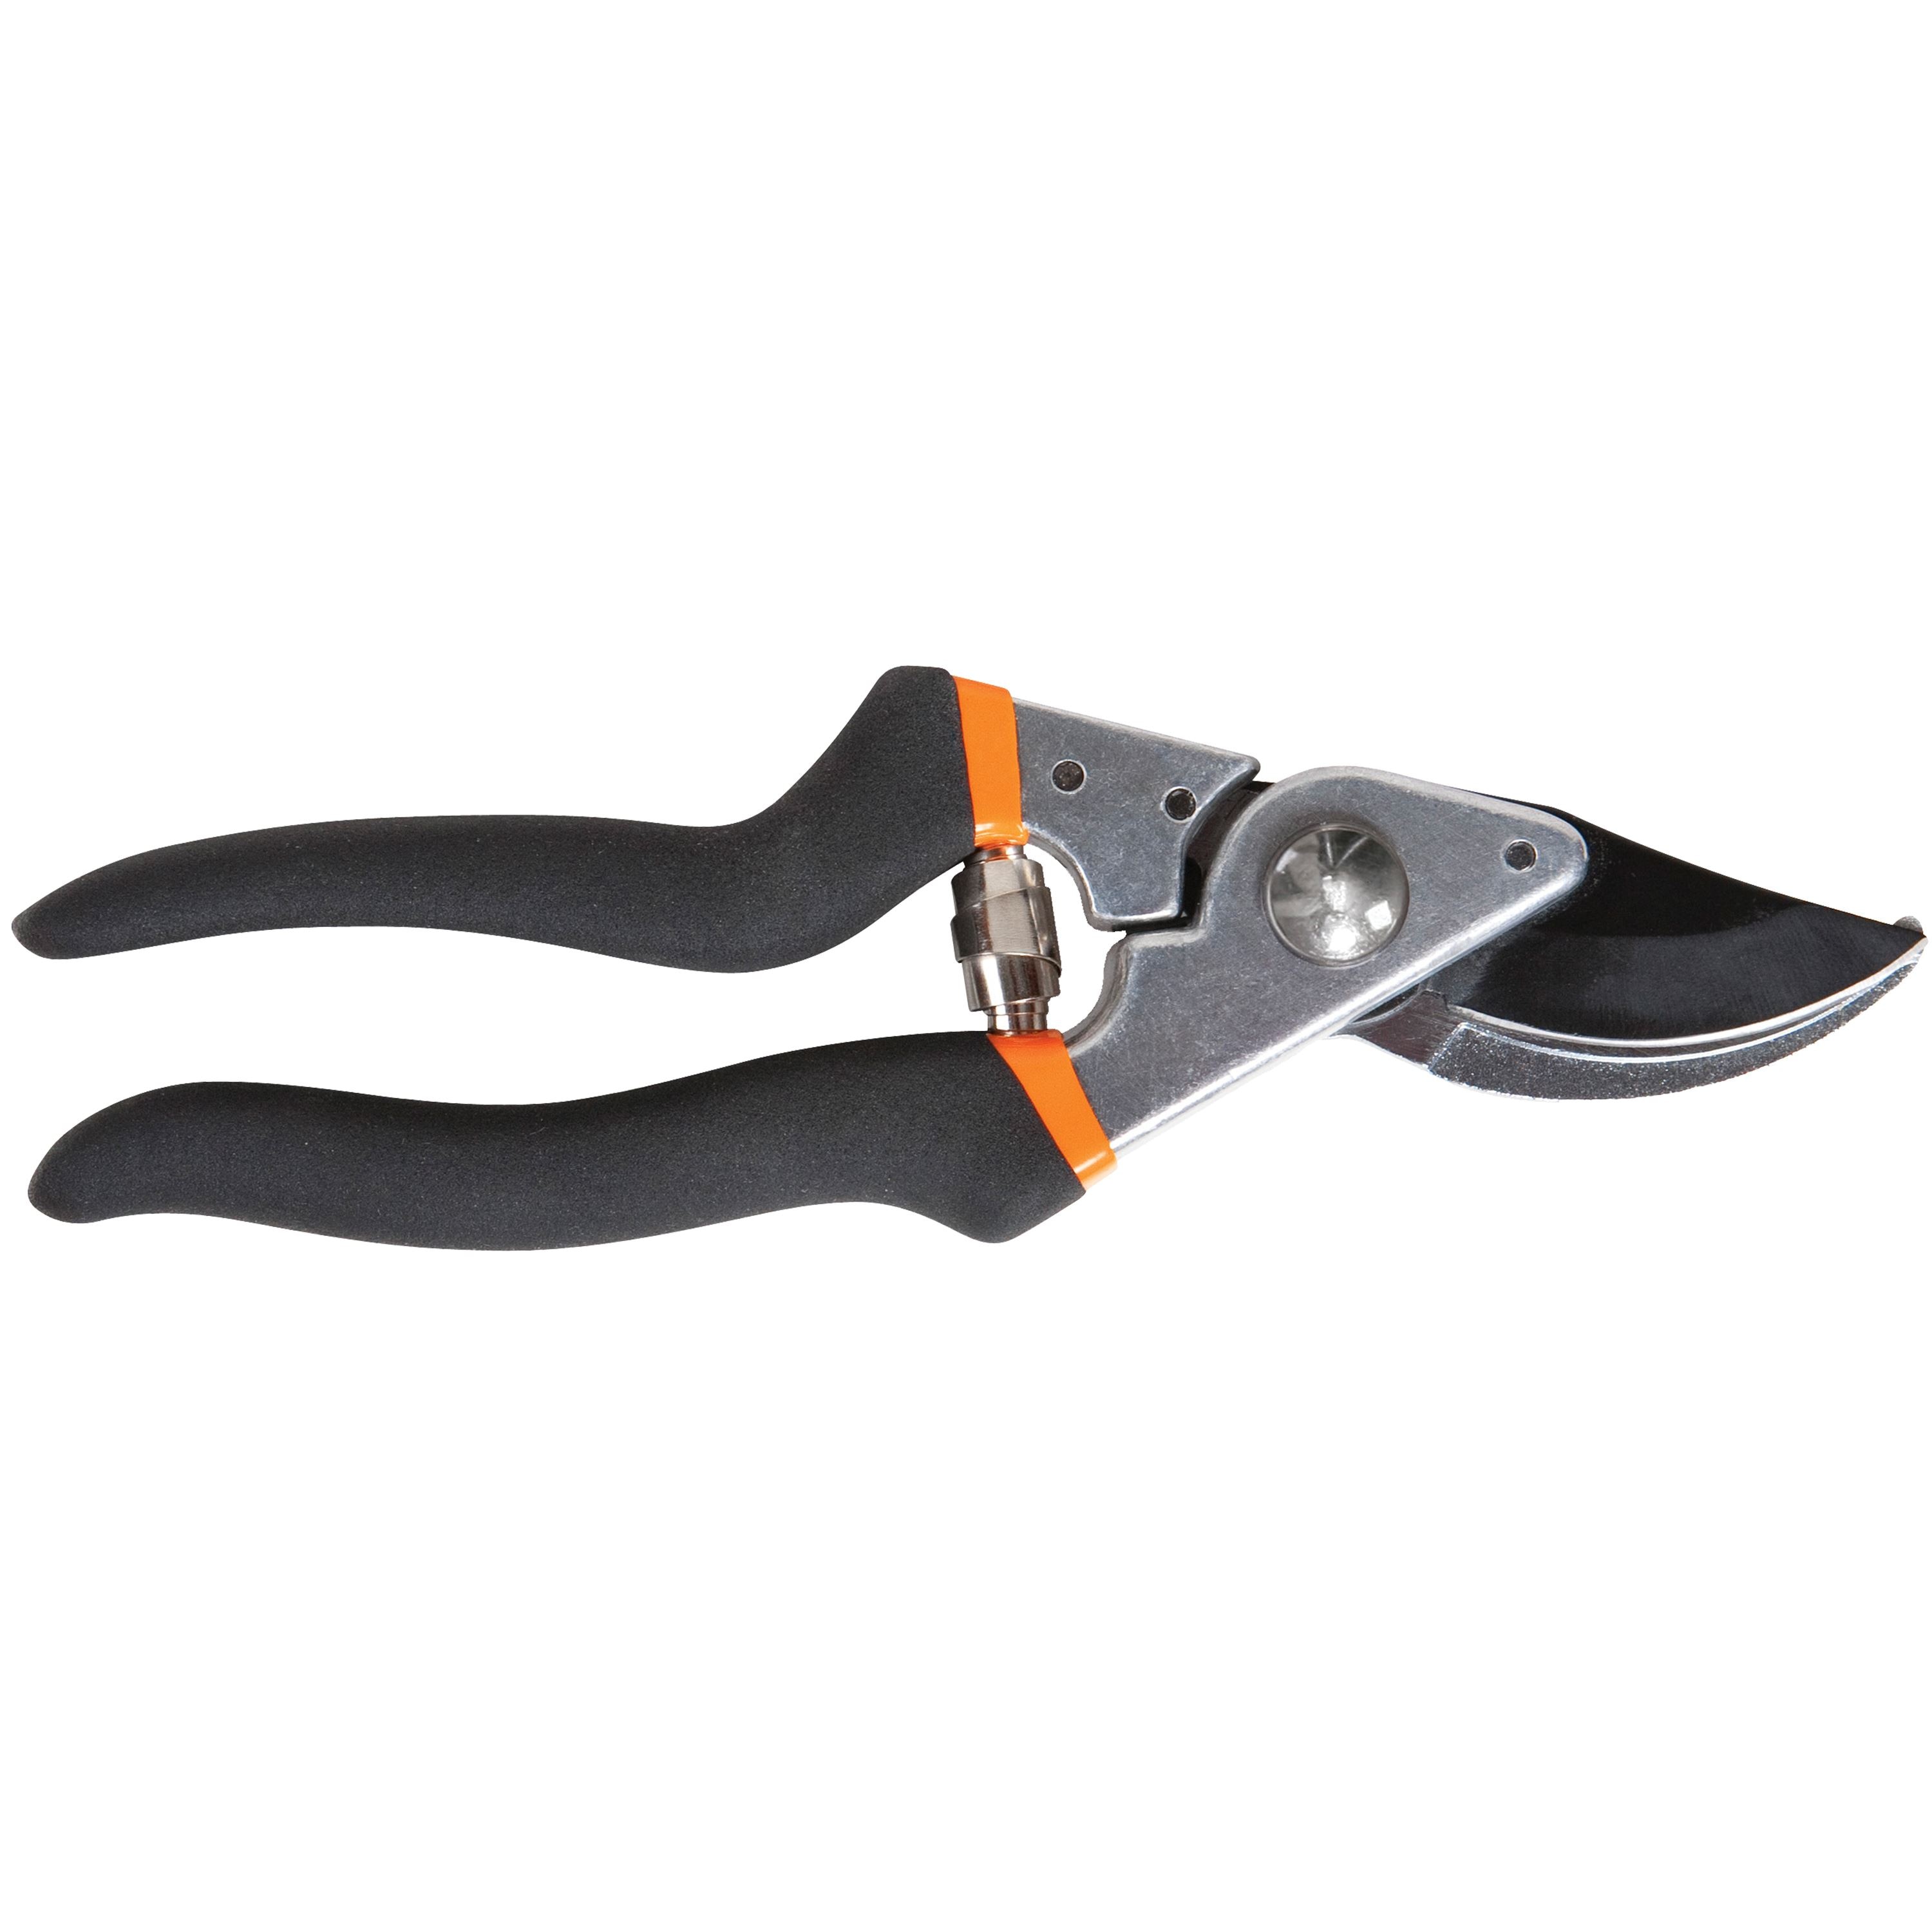 Fiskars Bypass Pruning Shears Review: The Perfect Garden Clippers